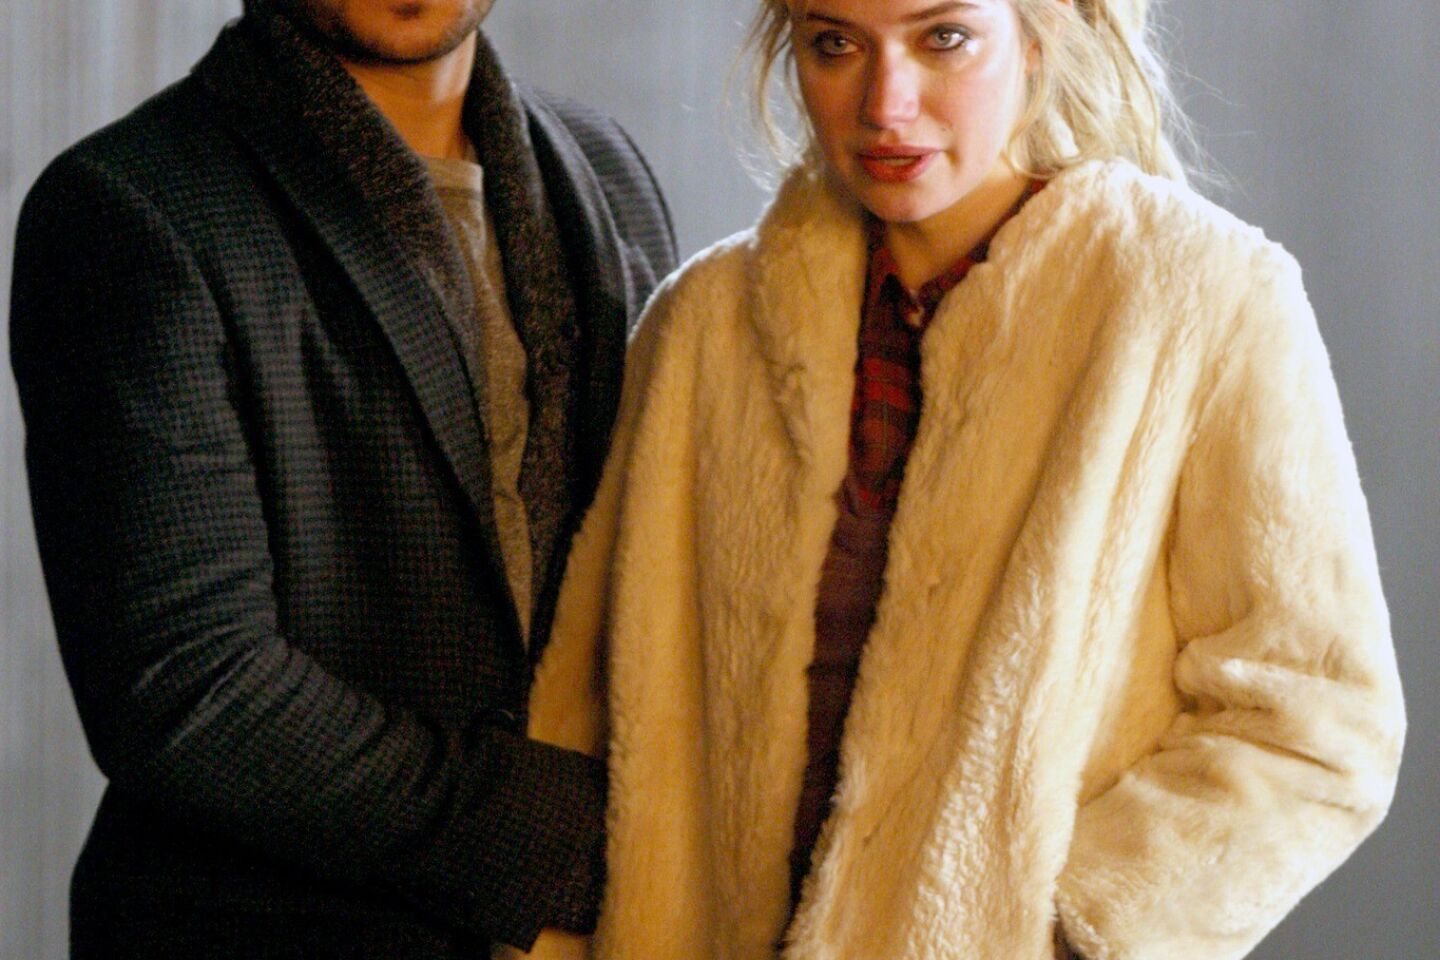 Zac Efron and Imogen Poots